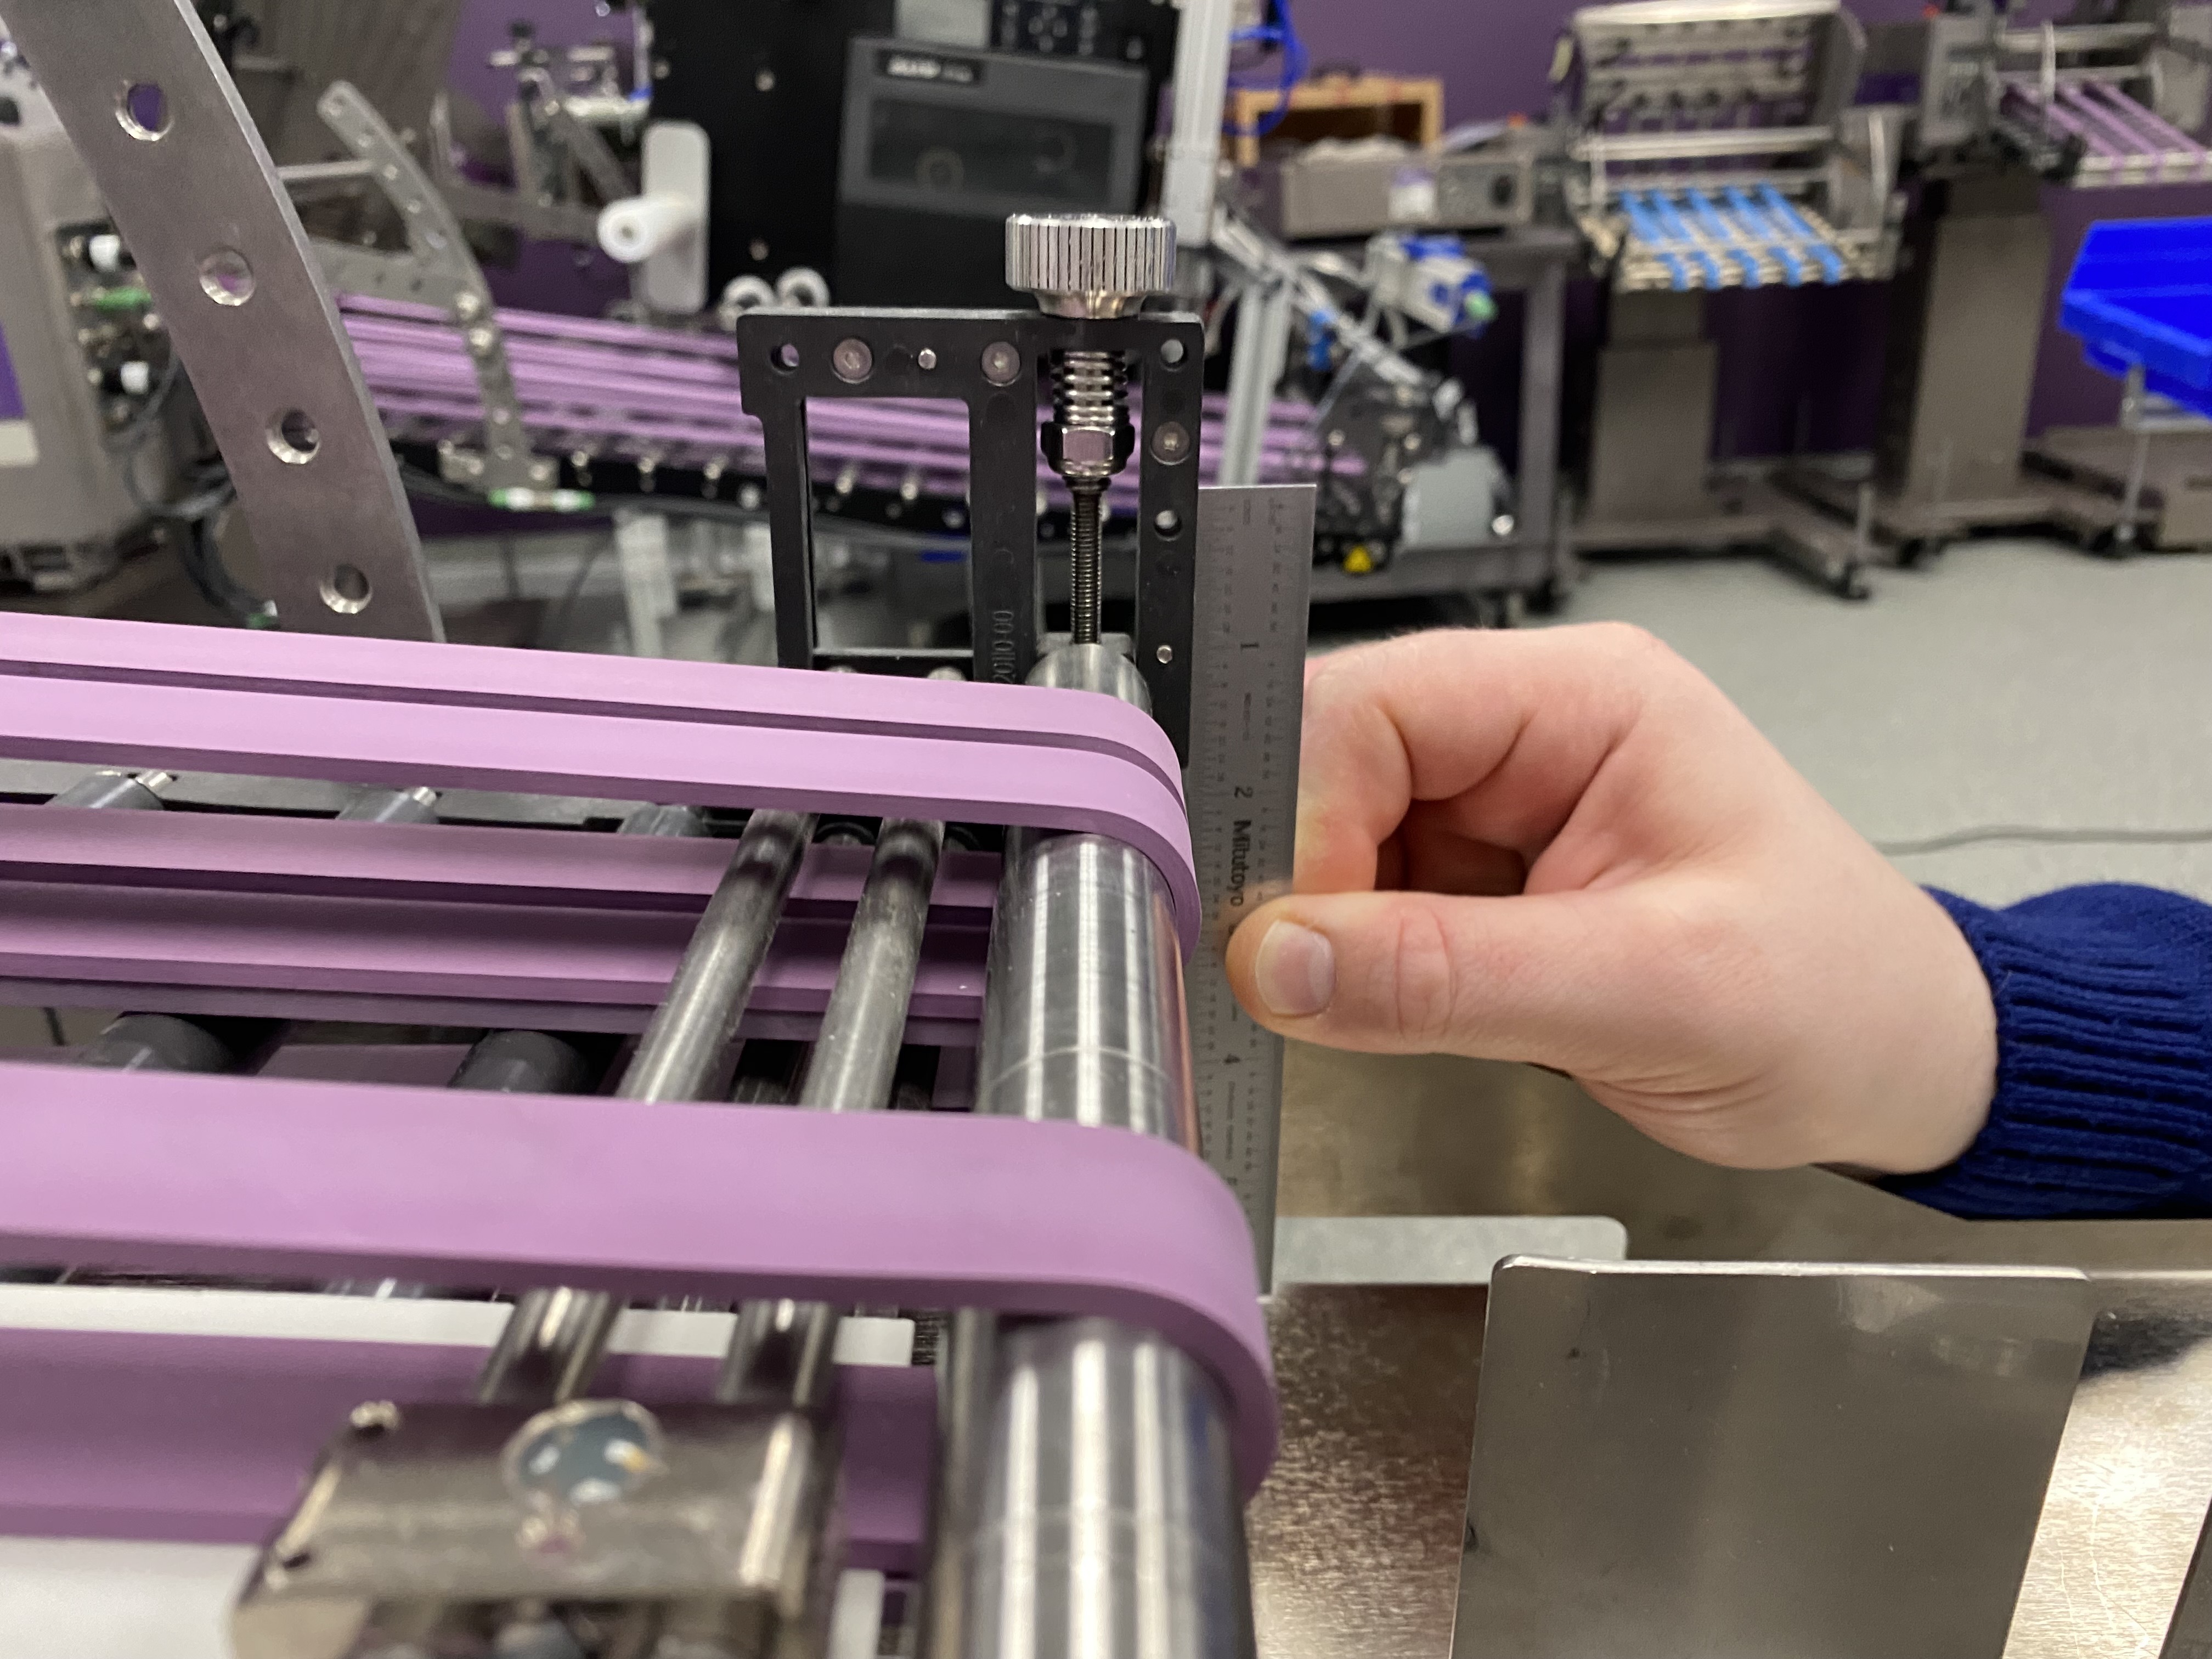 use straight edge to align catch tray correctly